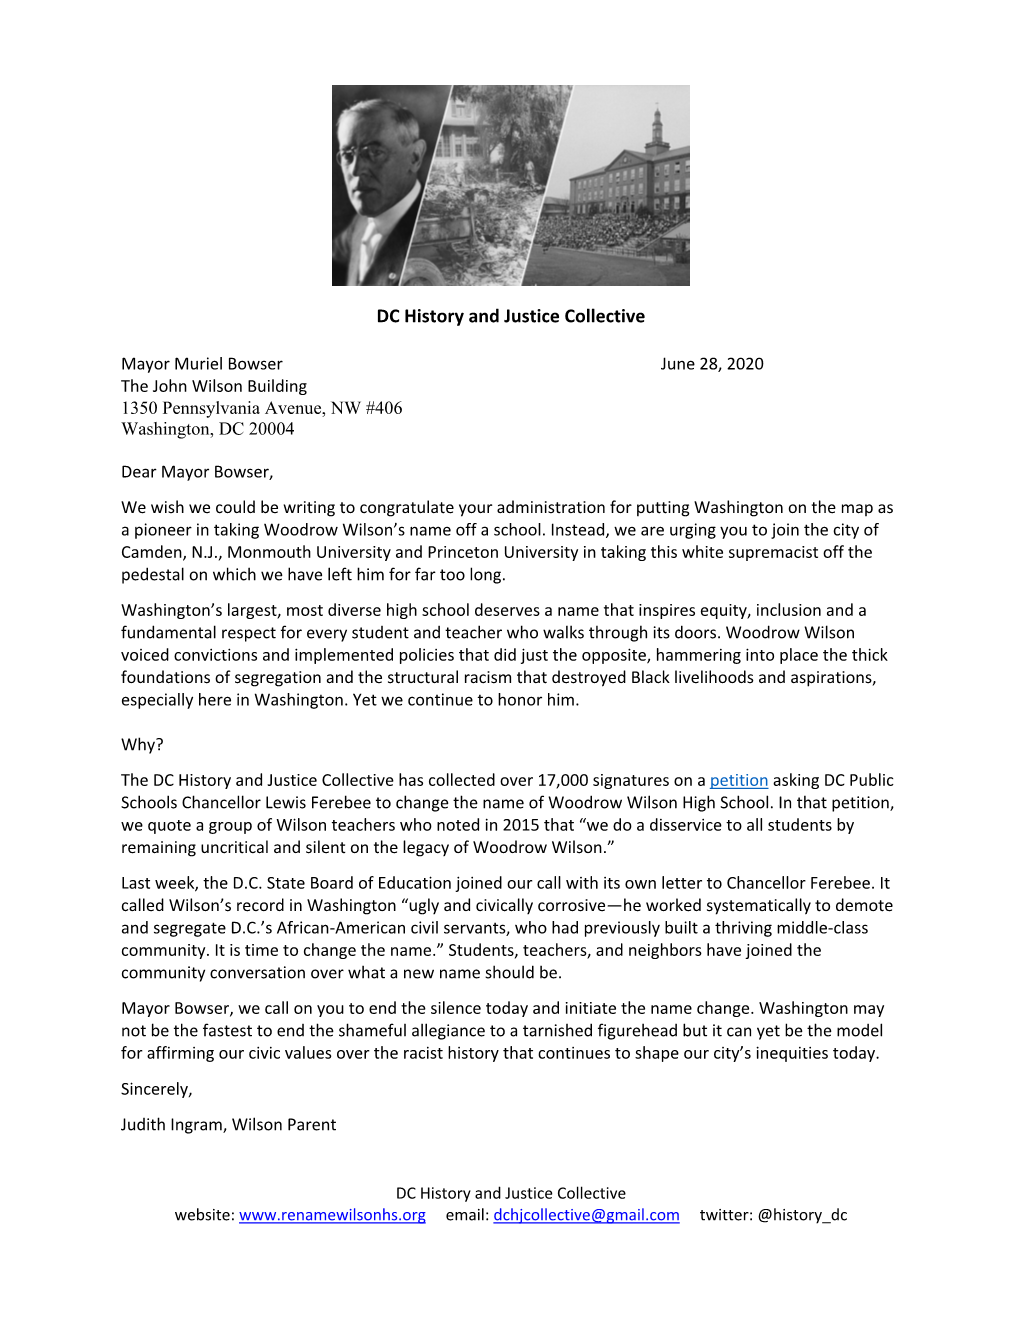 June 28, 2020 Letter from DCHJC To